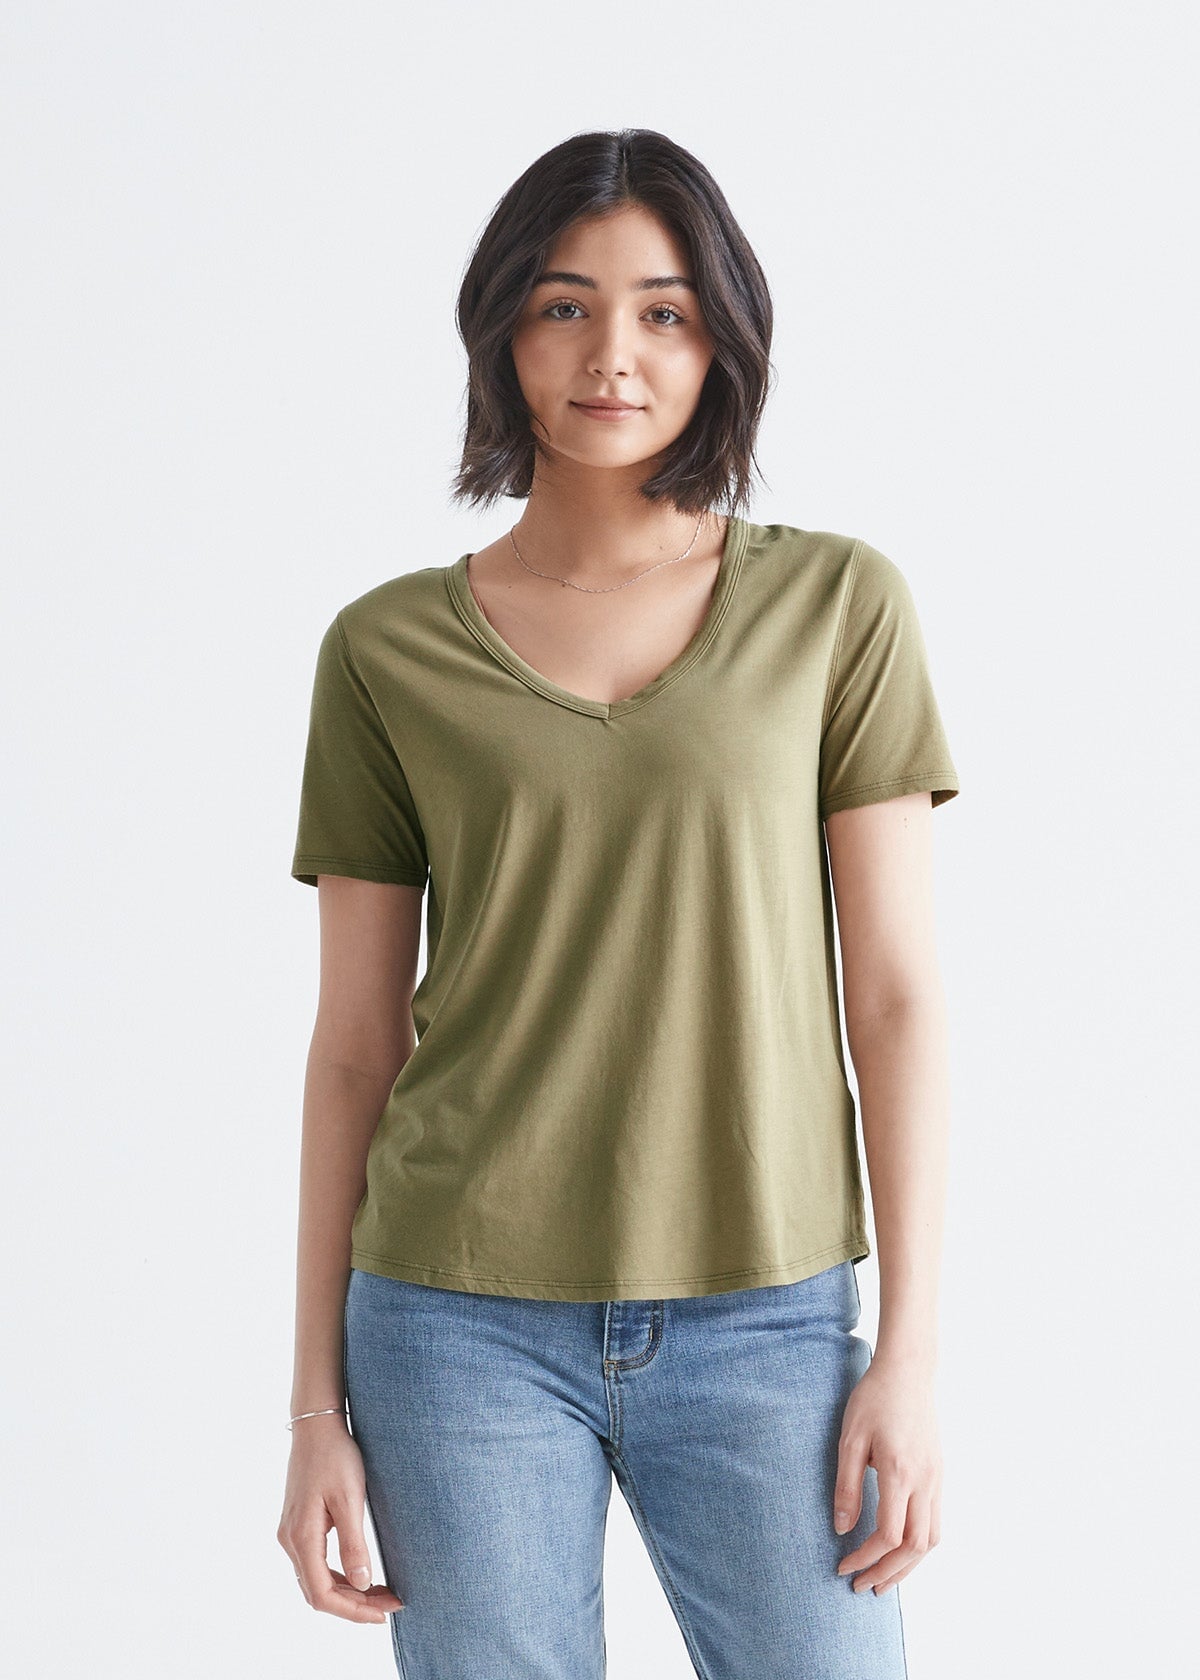 Women's Slim Fit Short Sleeve Ribbed T-shirt - A New Day™ Light